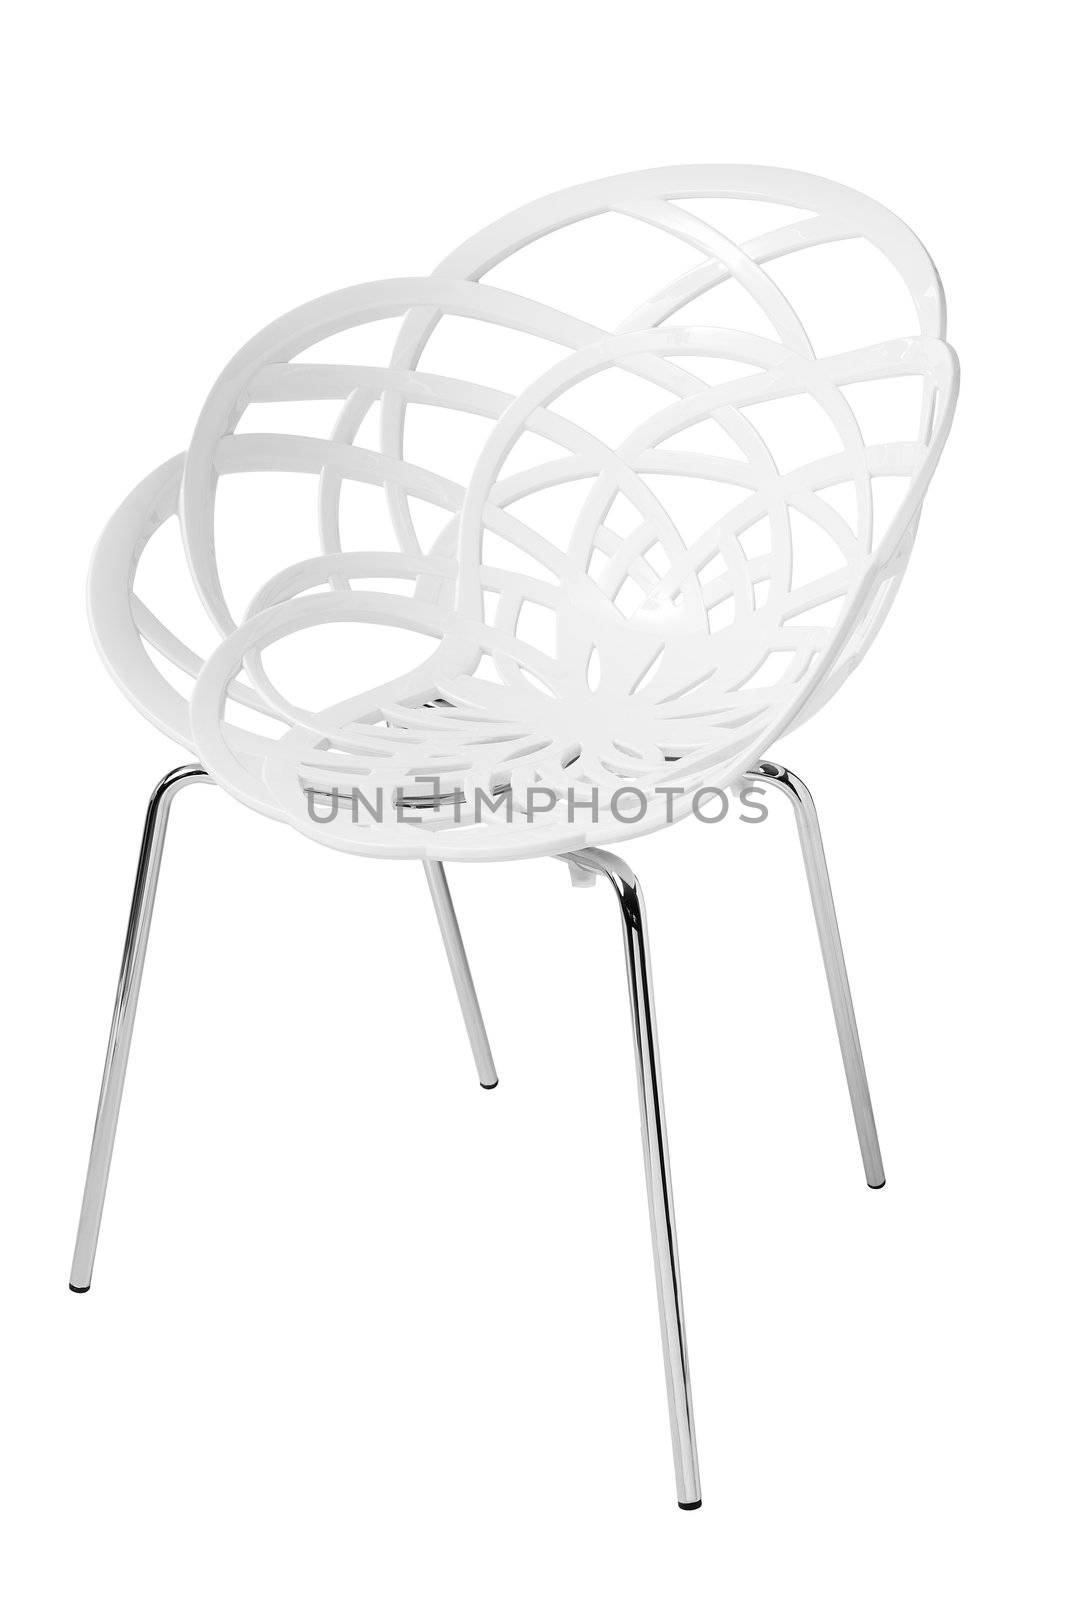 contemporary plastic chair isolated